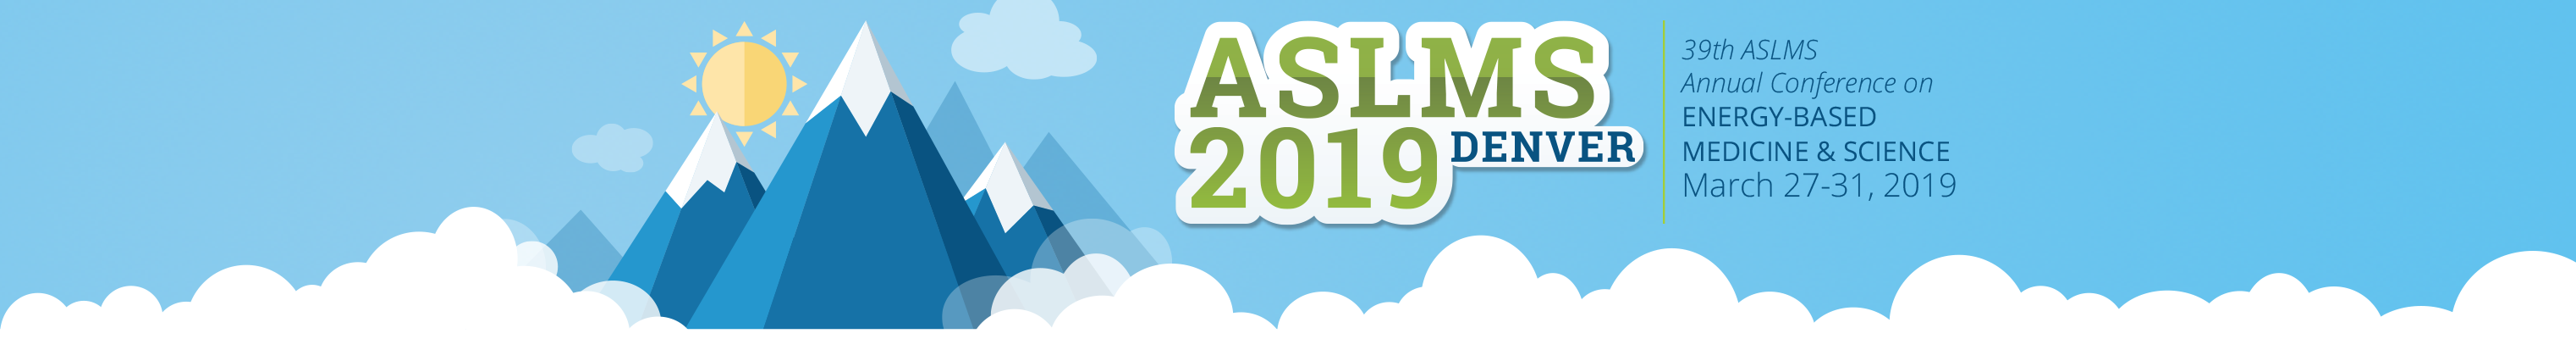 aslms-2019-banner